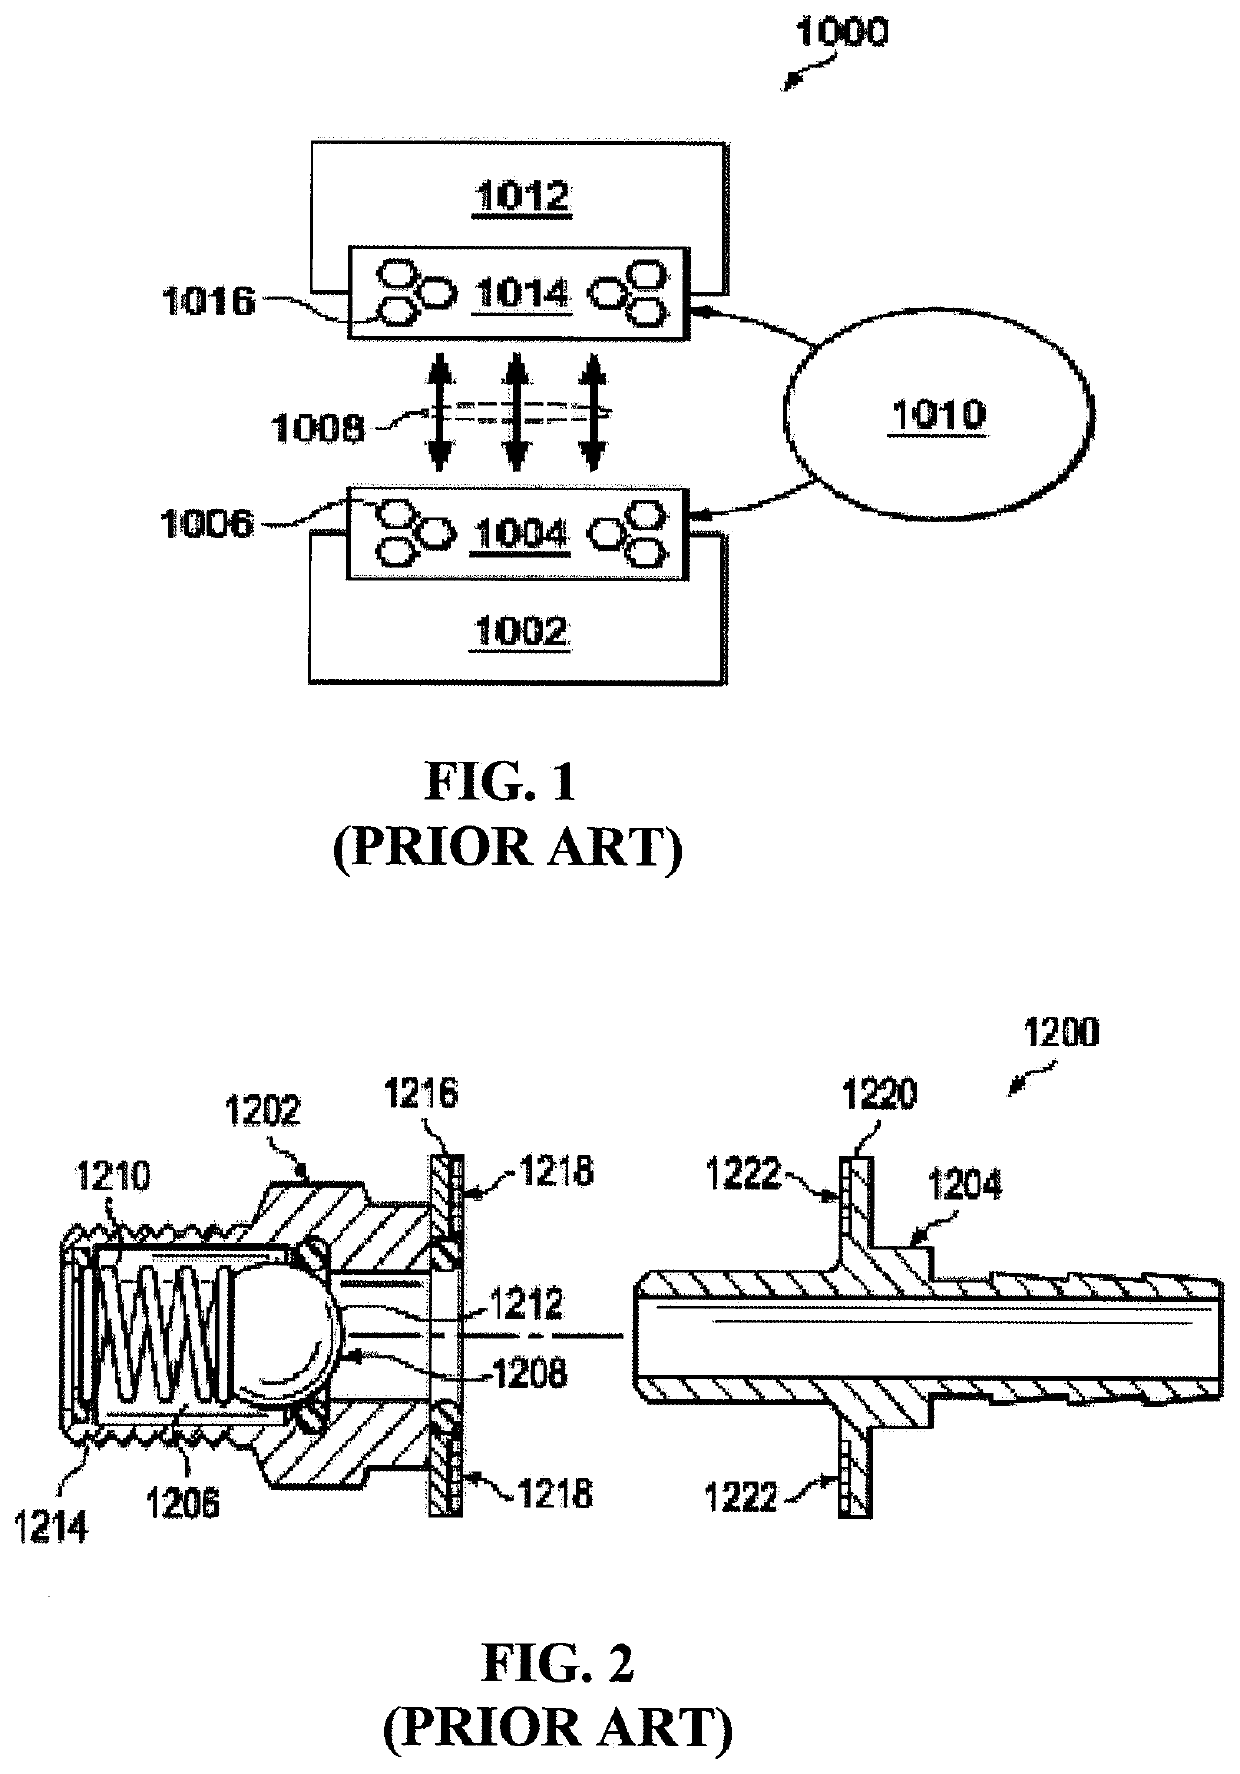 Filter interconnect utilizing correlated magnetic actuation for downstream system function